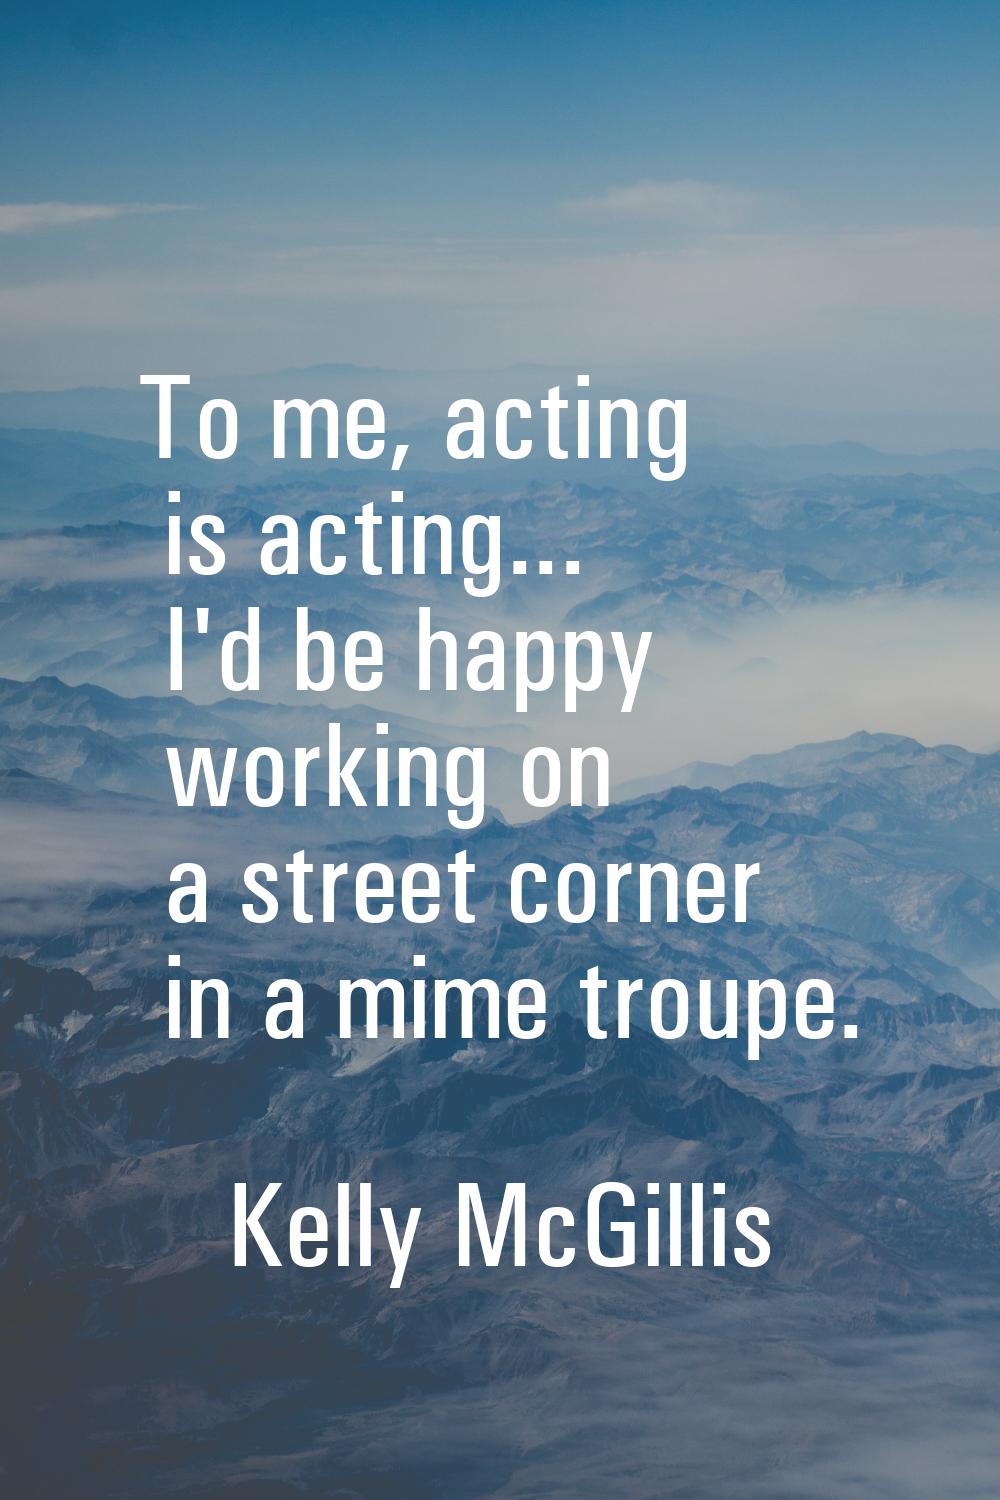 To me, acting is acting... I'd be happy working on a street corner in a mime troupe.